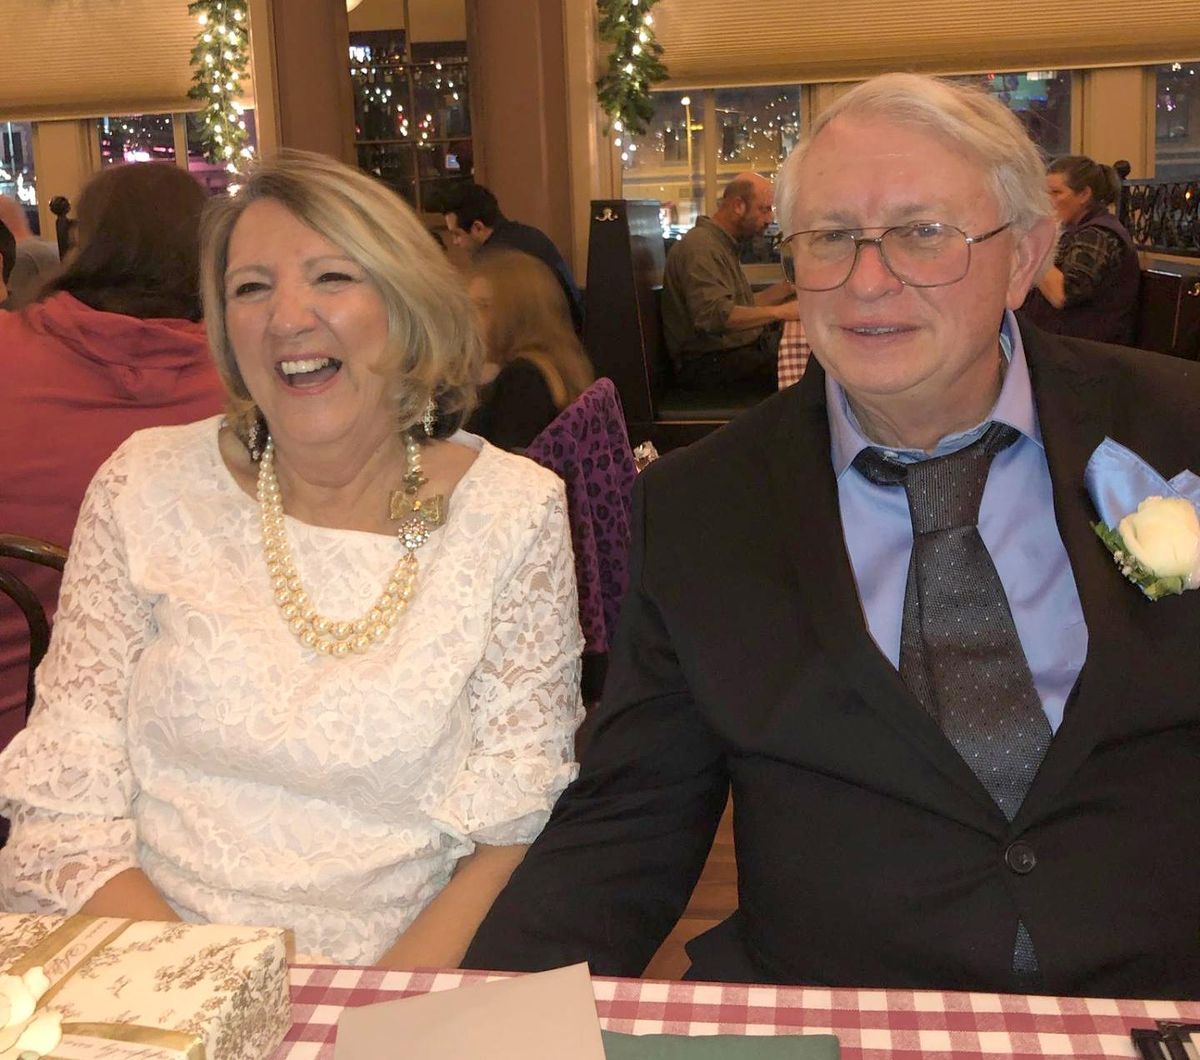 M.J. and Rick Pansie are shown at their wedding reception in December of 2018. They met a couple of years ago when M.J. began caring for Rick’s elderly mother. They married in December of 2018 and recently celebrated one year of marriage. Rick was a lifelong bachelor and M.J. was divorced and single for many years and neither thought they could find love after retirement. (PHOTO COURTESY OF RICK AND MJ PANSIE / SR)